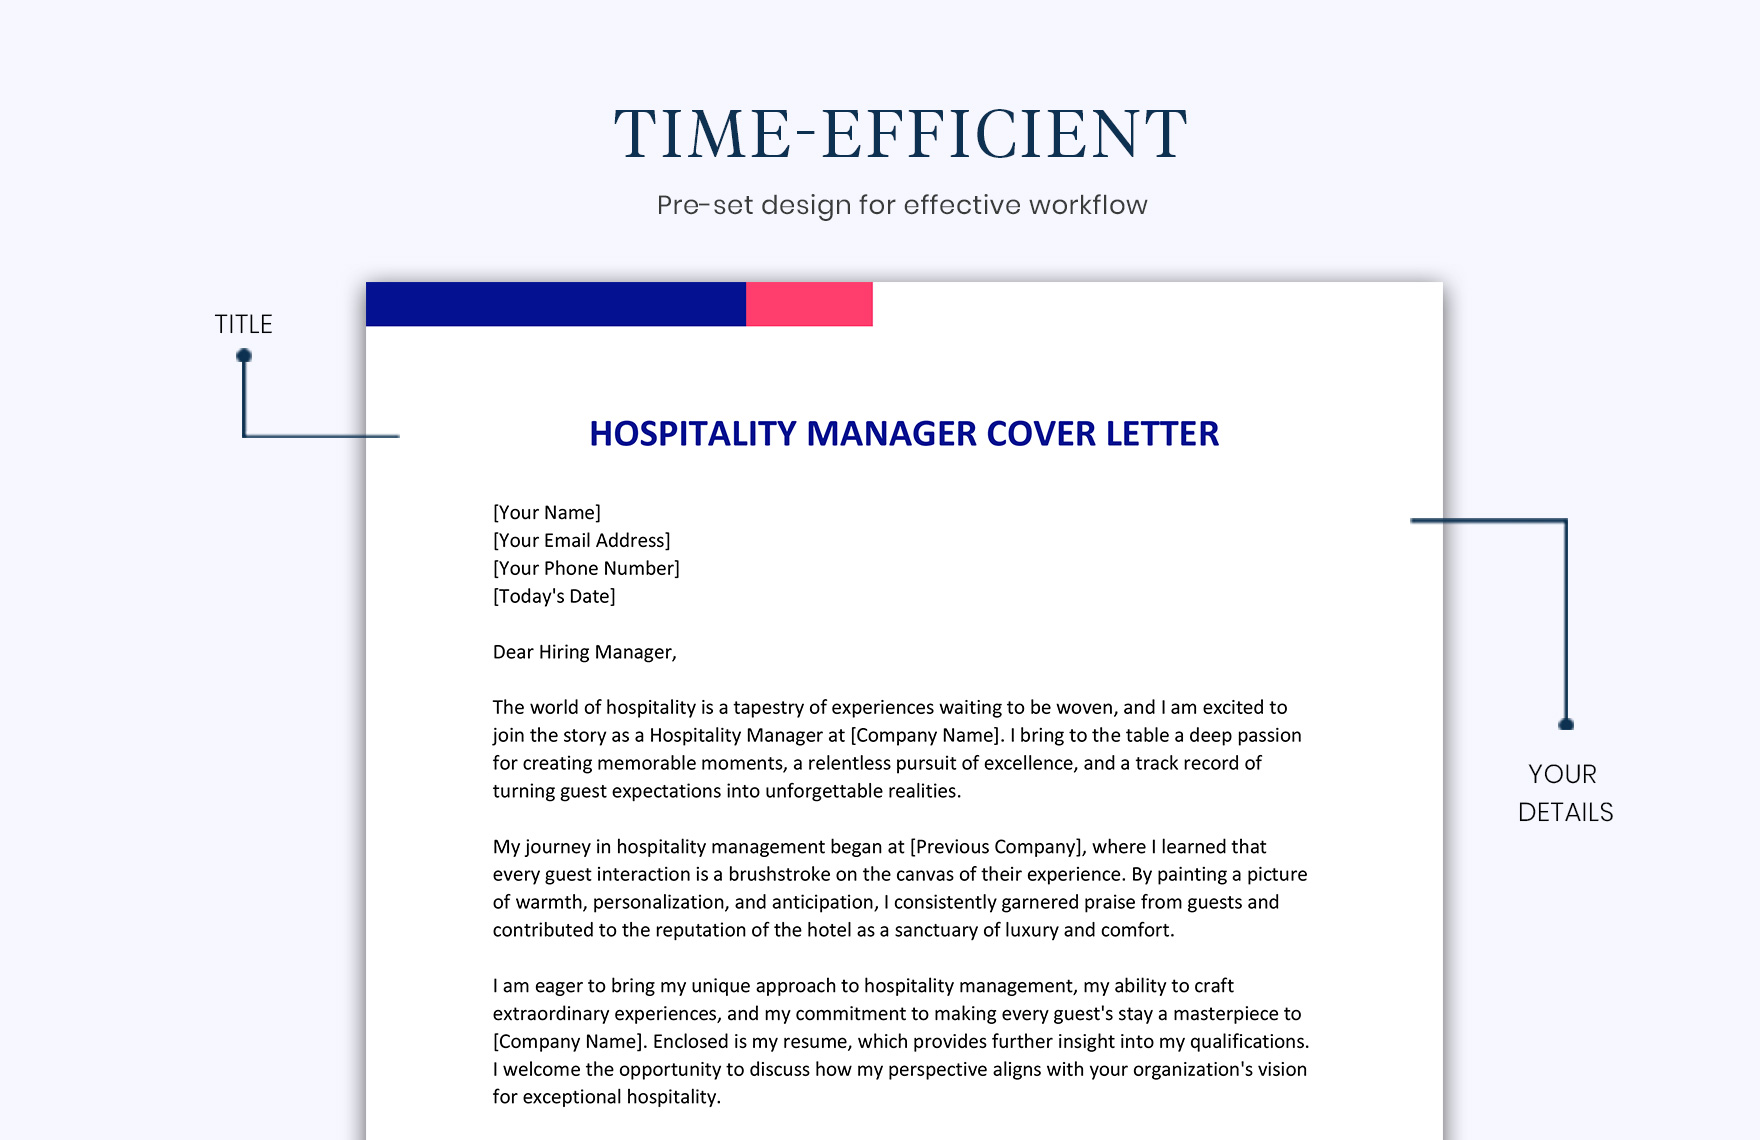 Hospitality Manager Cover Letter